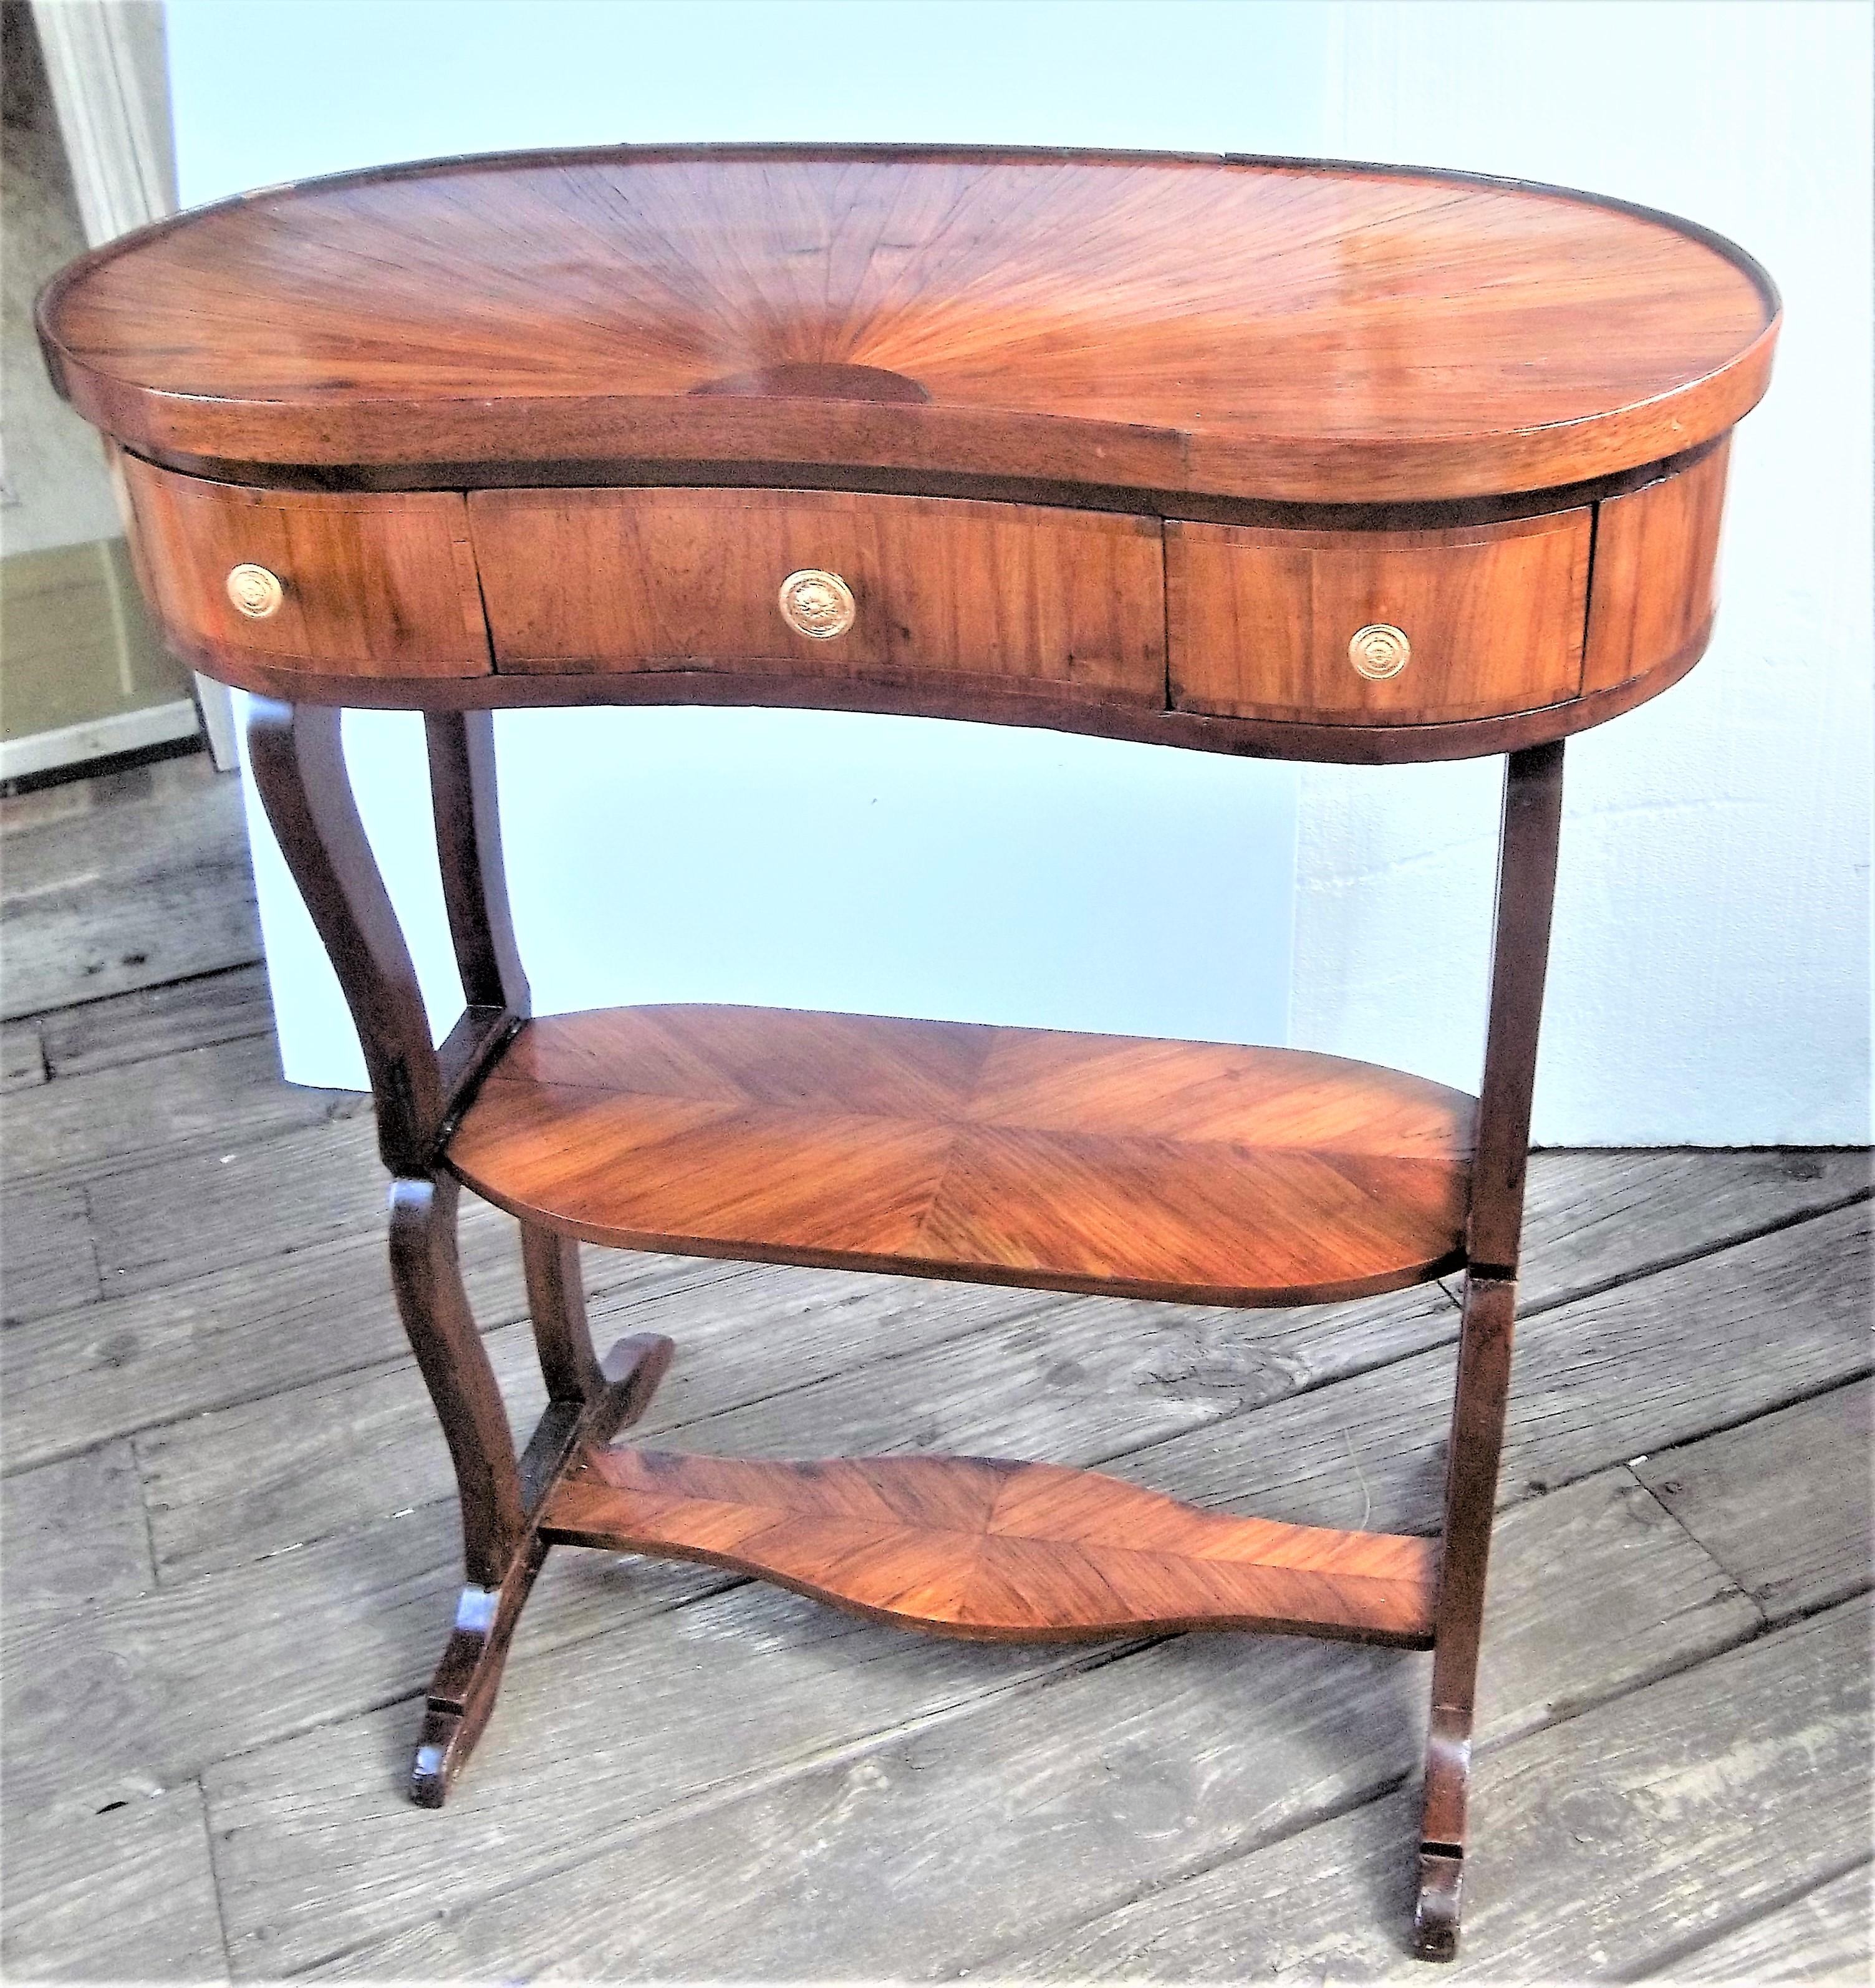 Louis Xvi Style Tulipwood Three-Tiered Desk or Dressing Table with Sunburst Top 7